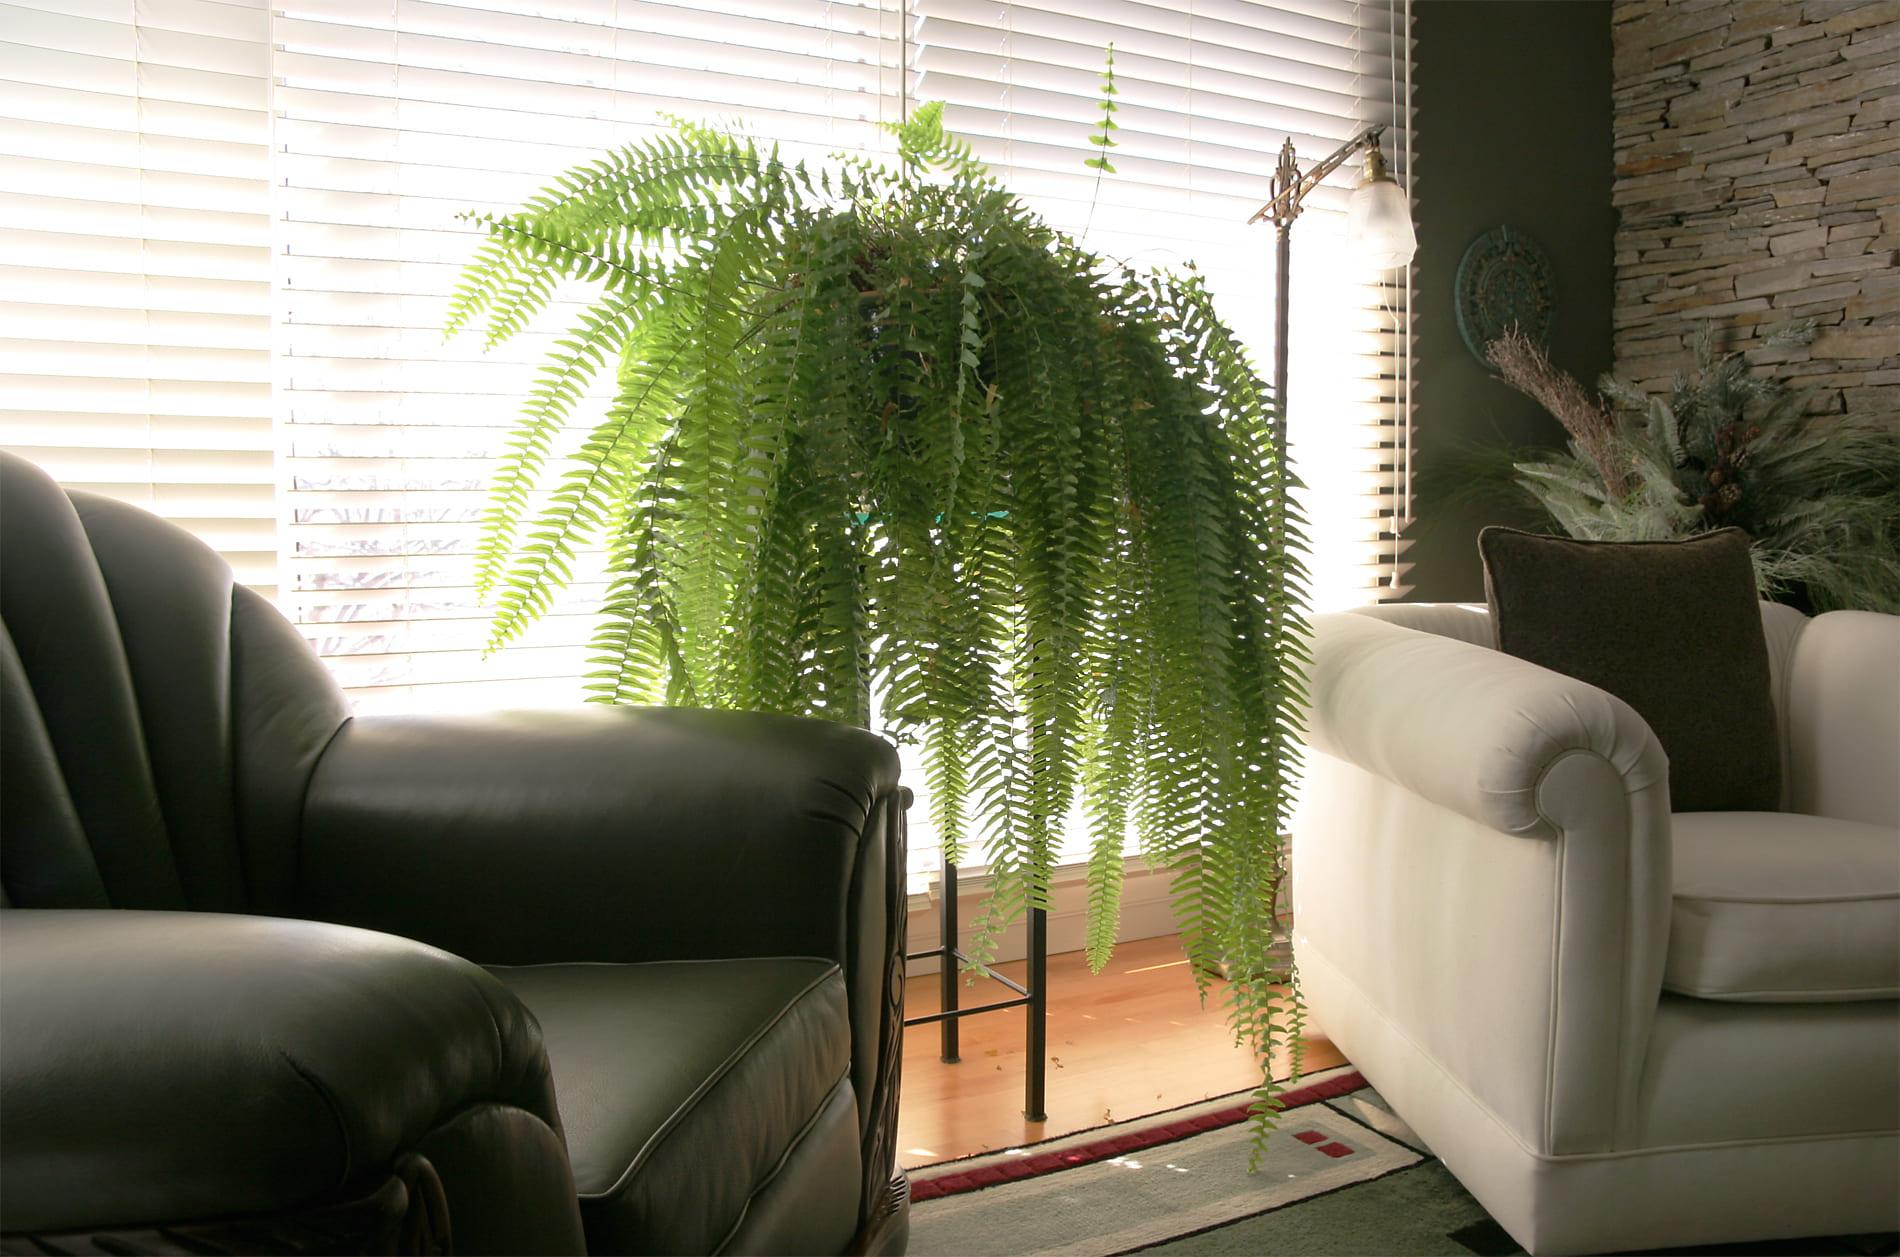 21 best ideas to decorate the house with ferns - 179